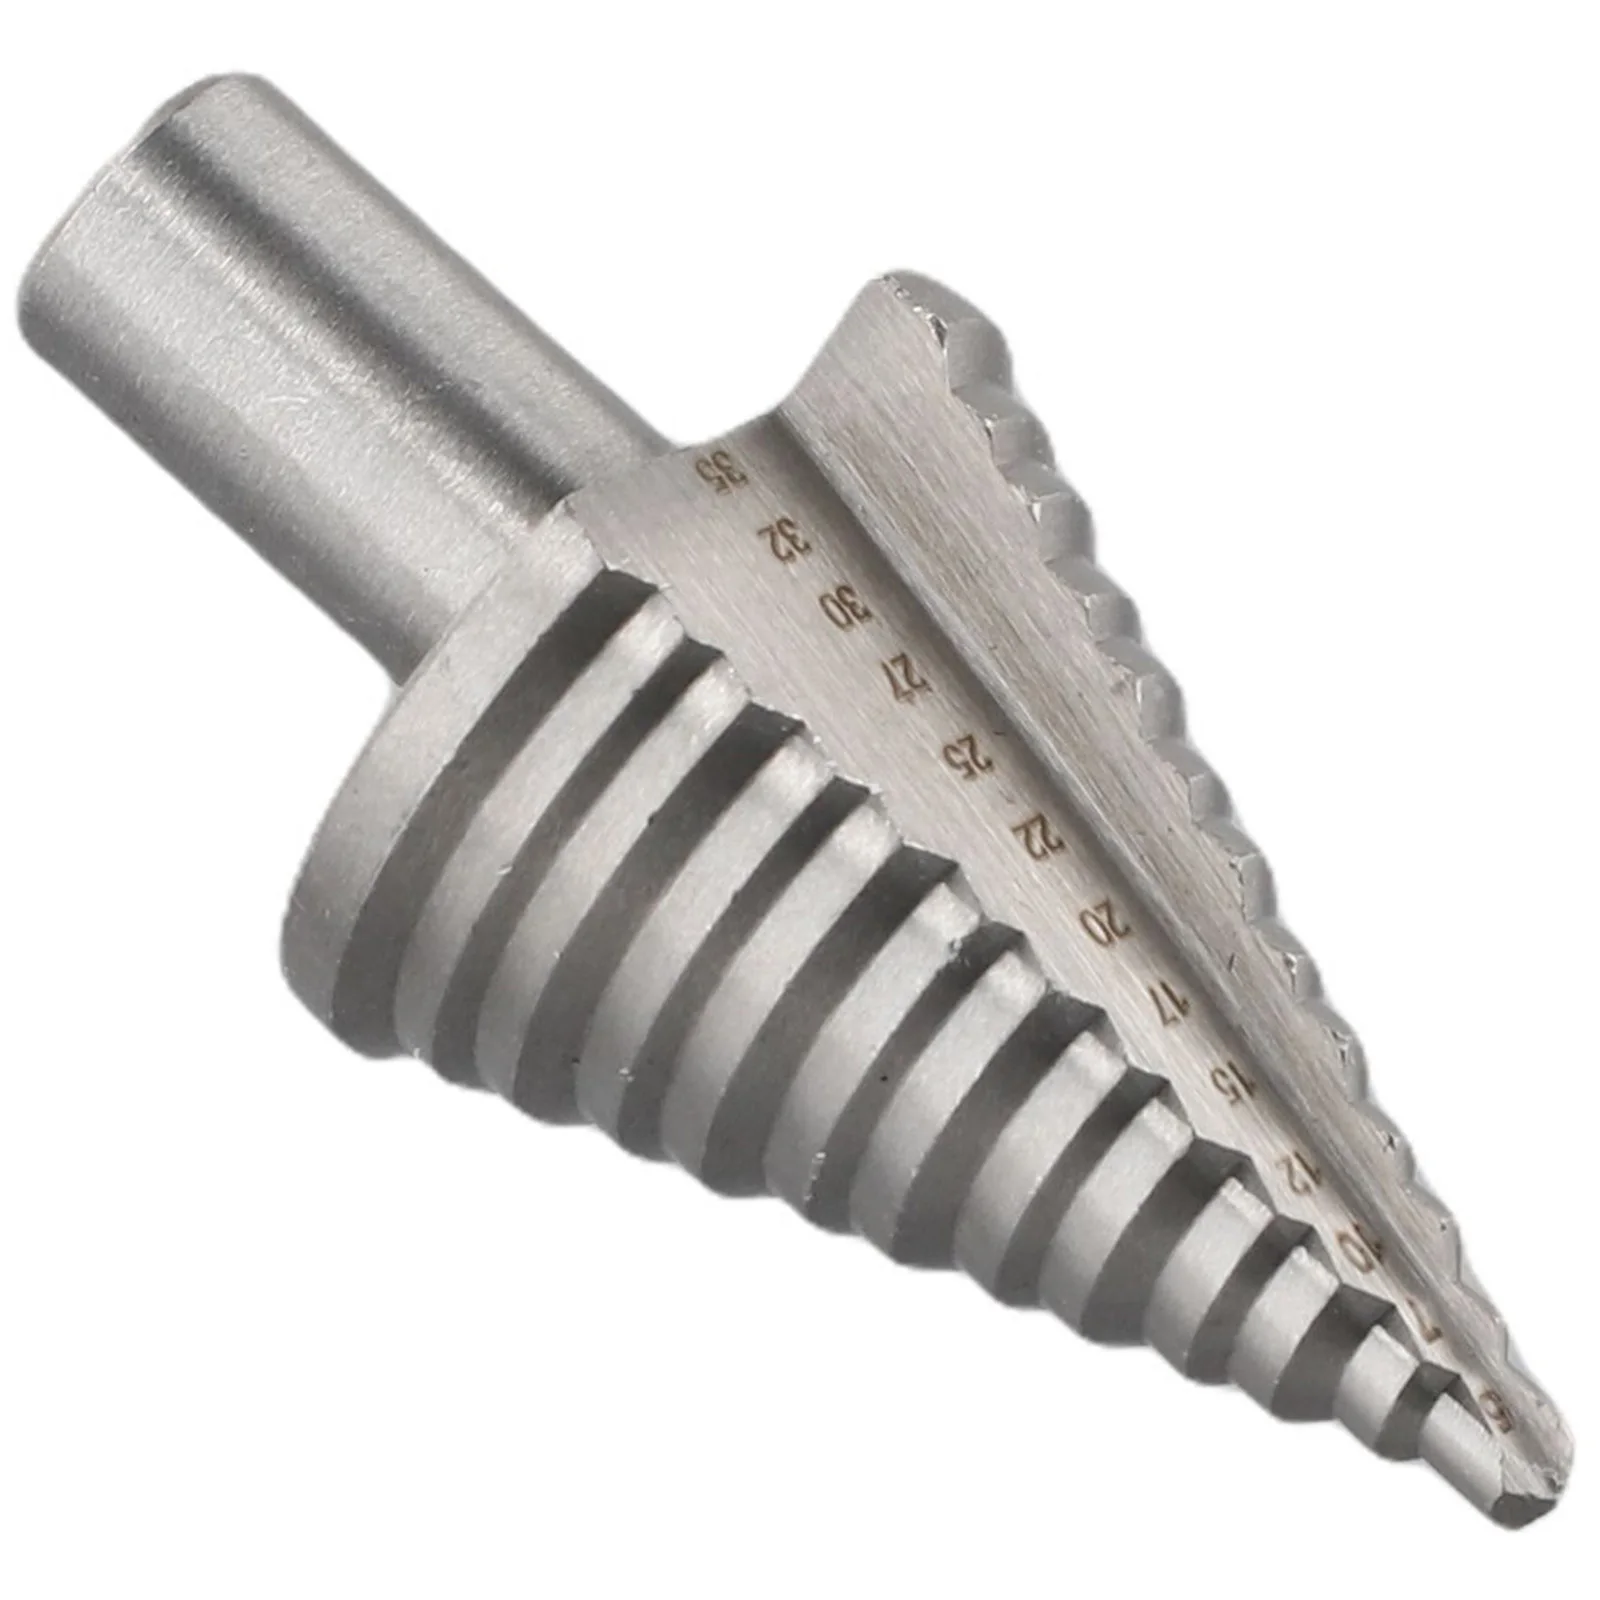 

1PC 5-35mm Titanium Coated Step Drill Bits HSS Straight Groove Step Cone Drill High Speed Steel Wood Metal Hole Cutter